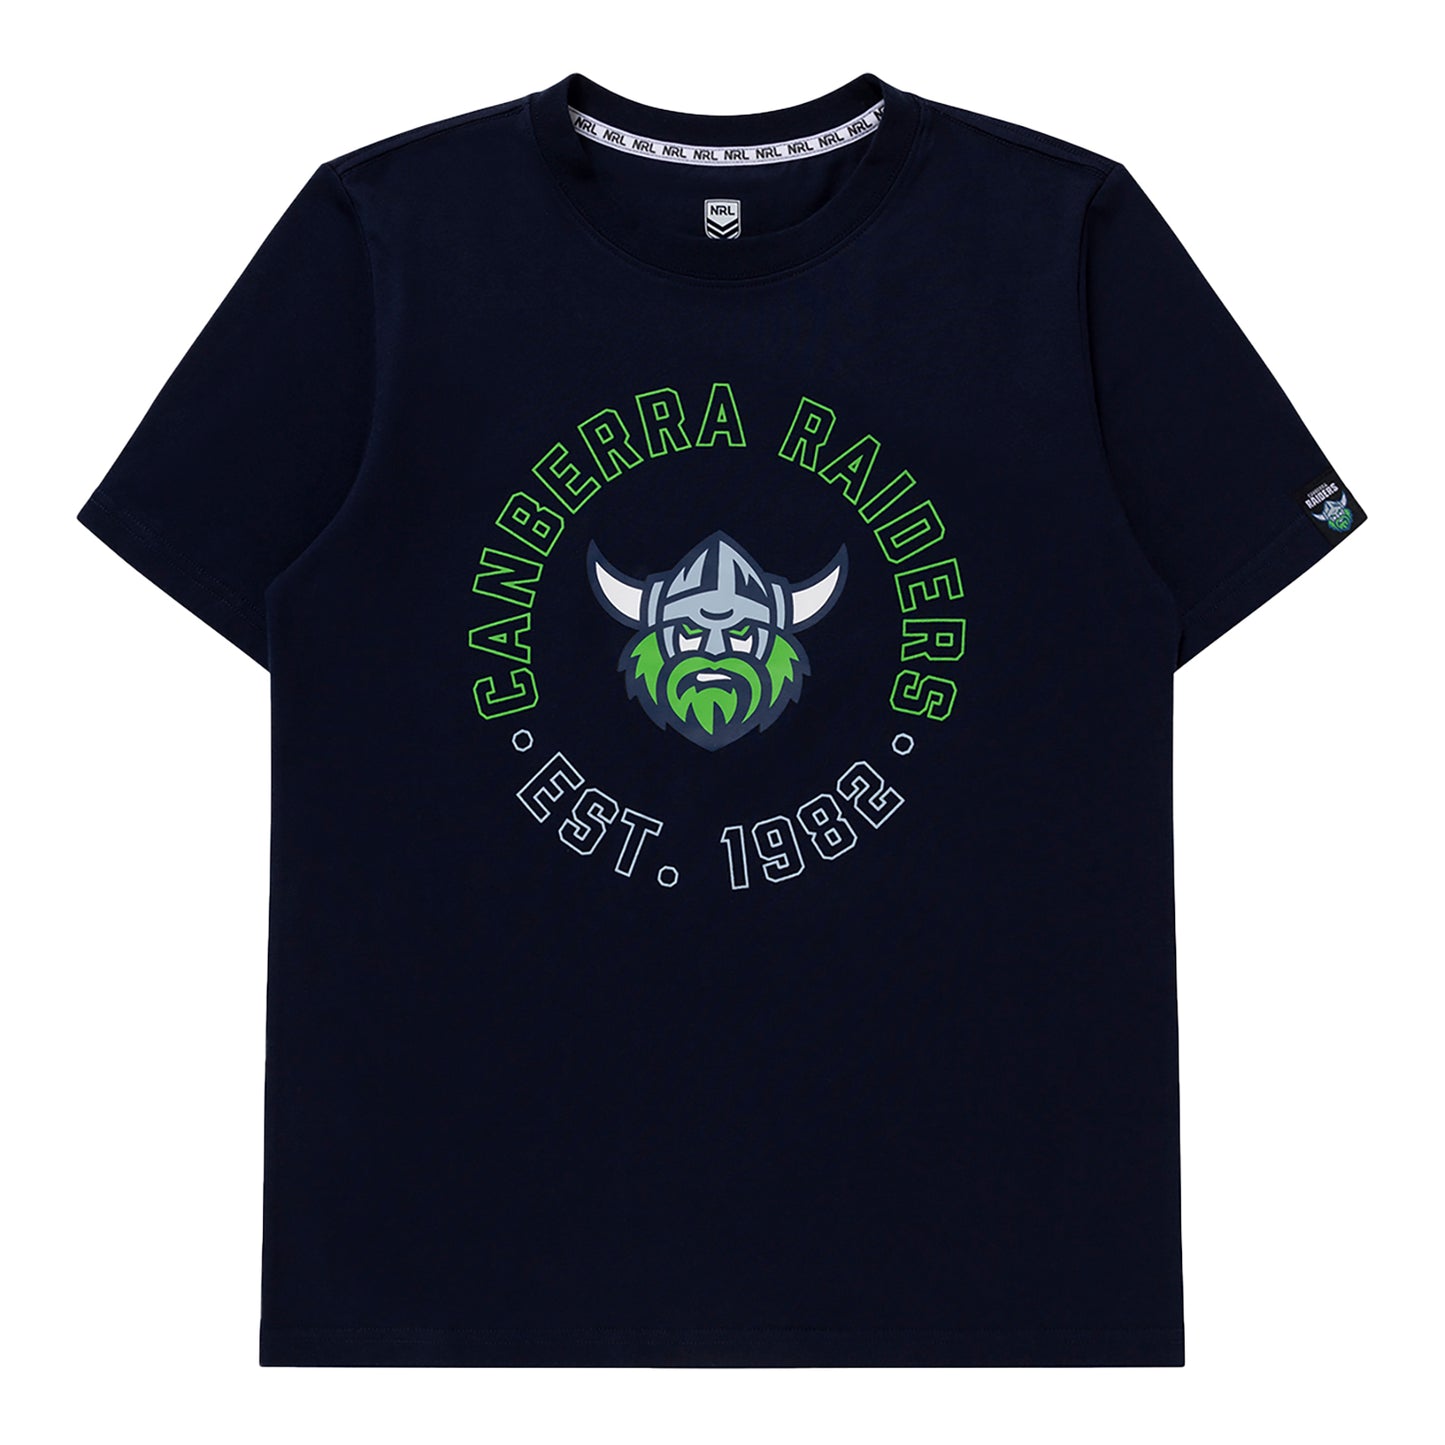 Canberra Raiders Youth Supporter Tee